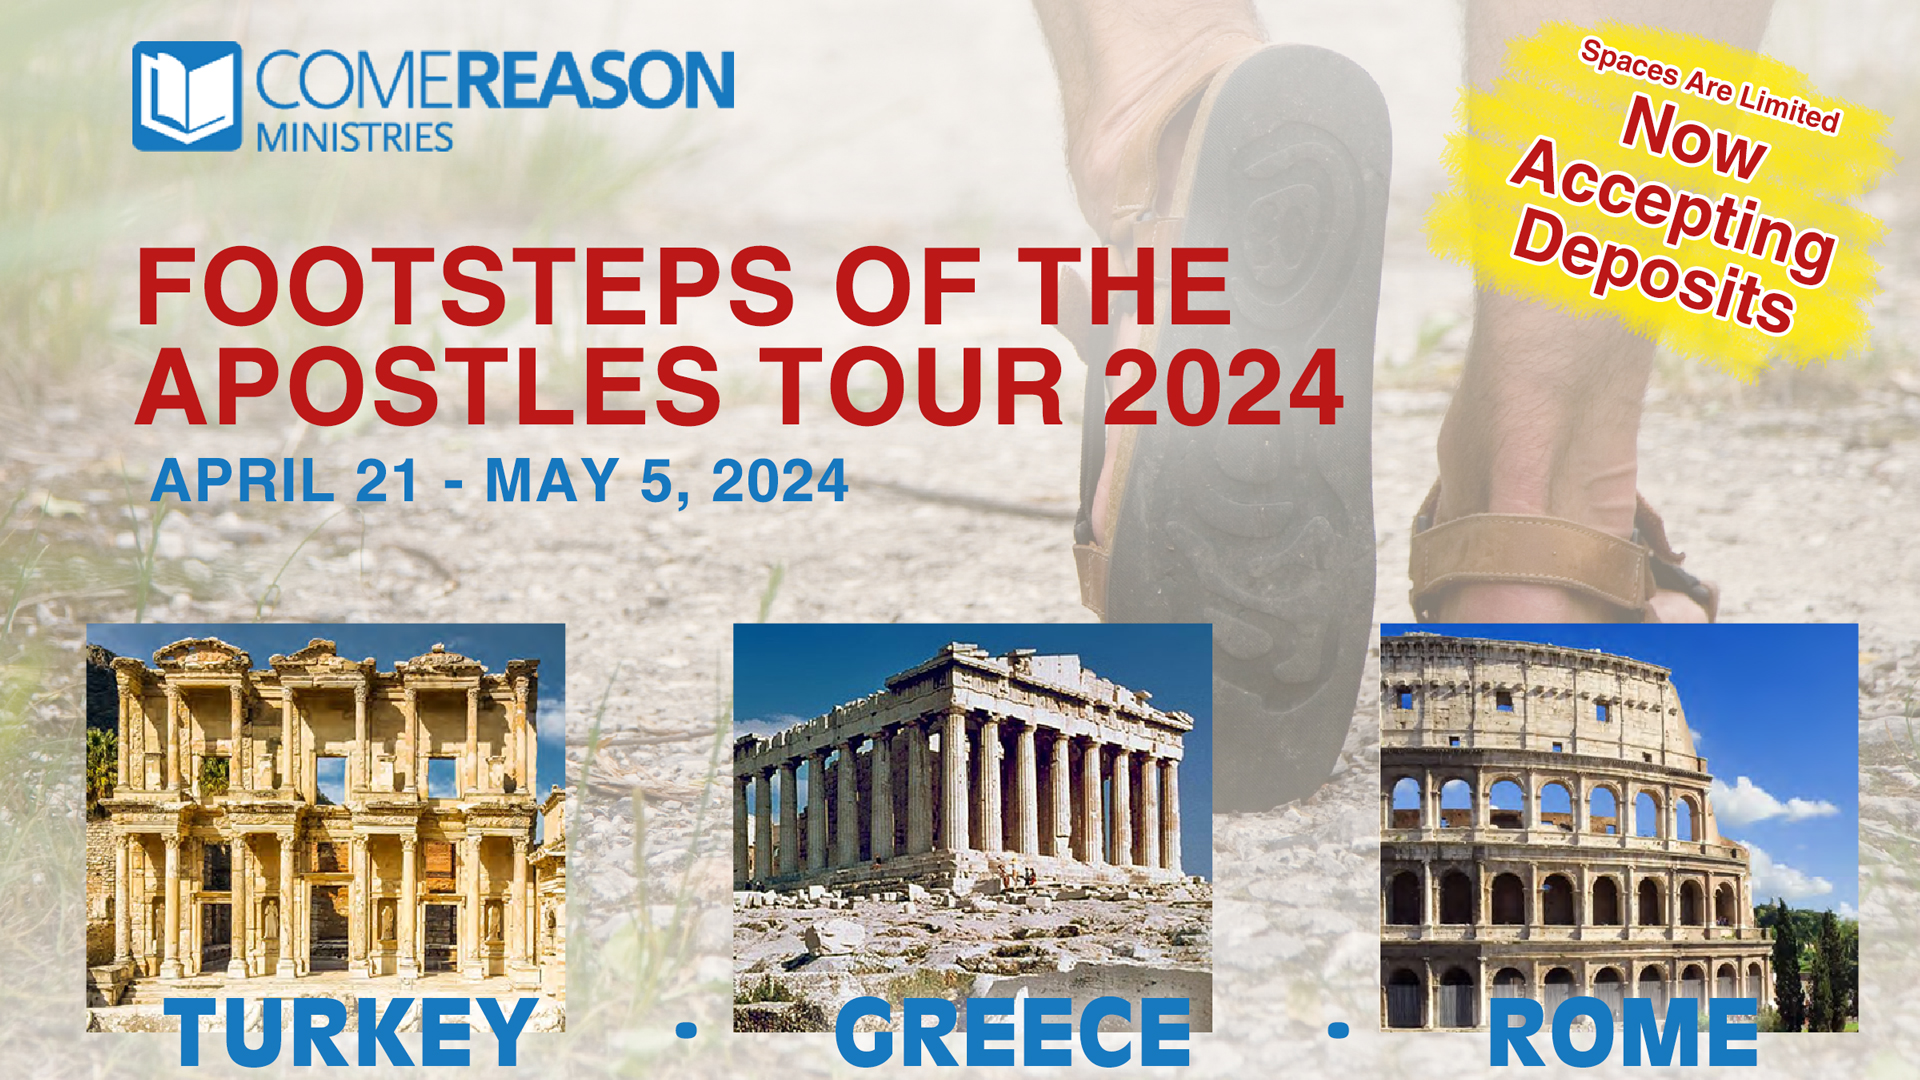 Footsteps of the Apostles Tour - Come Reason Ministries